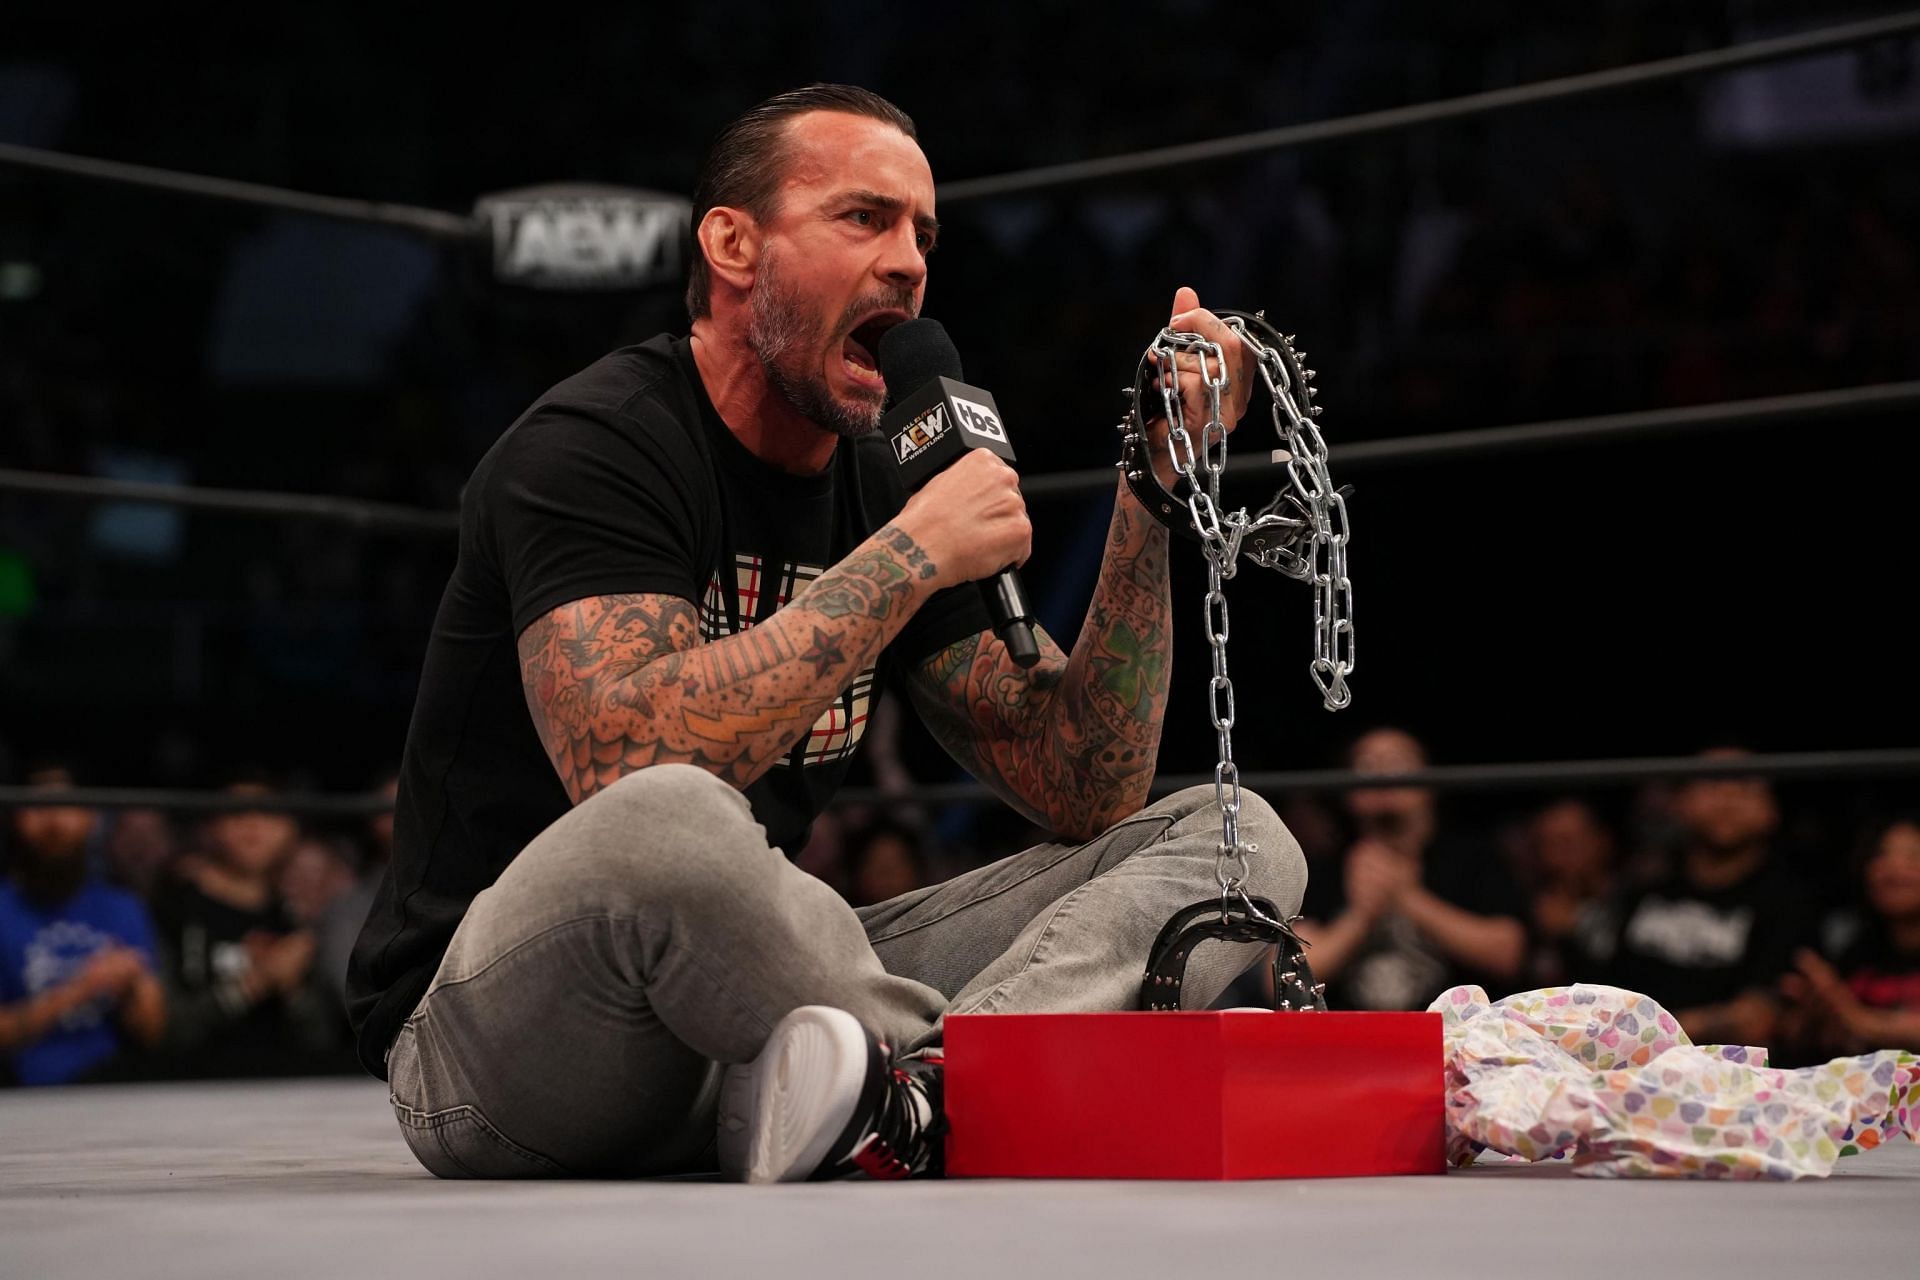 Will CM Punk return to AEW anytime soon?